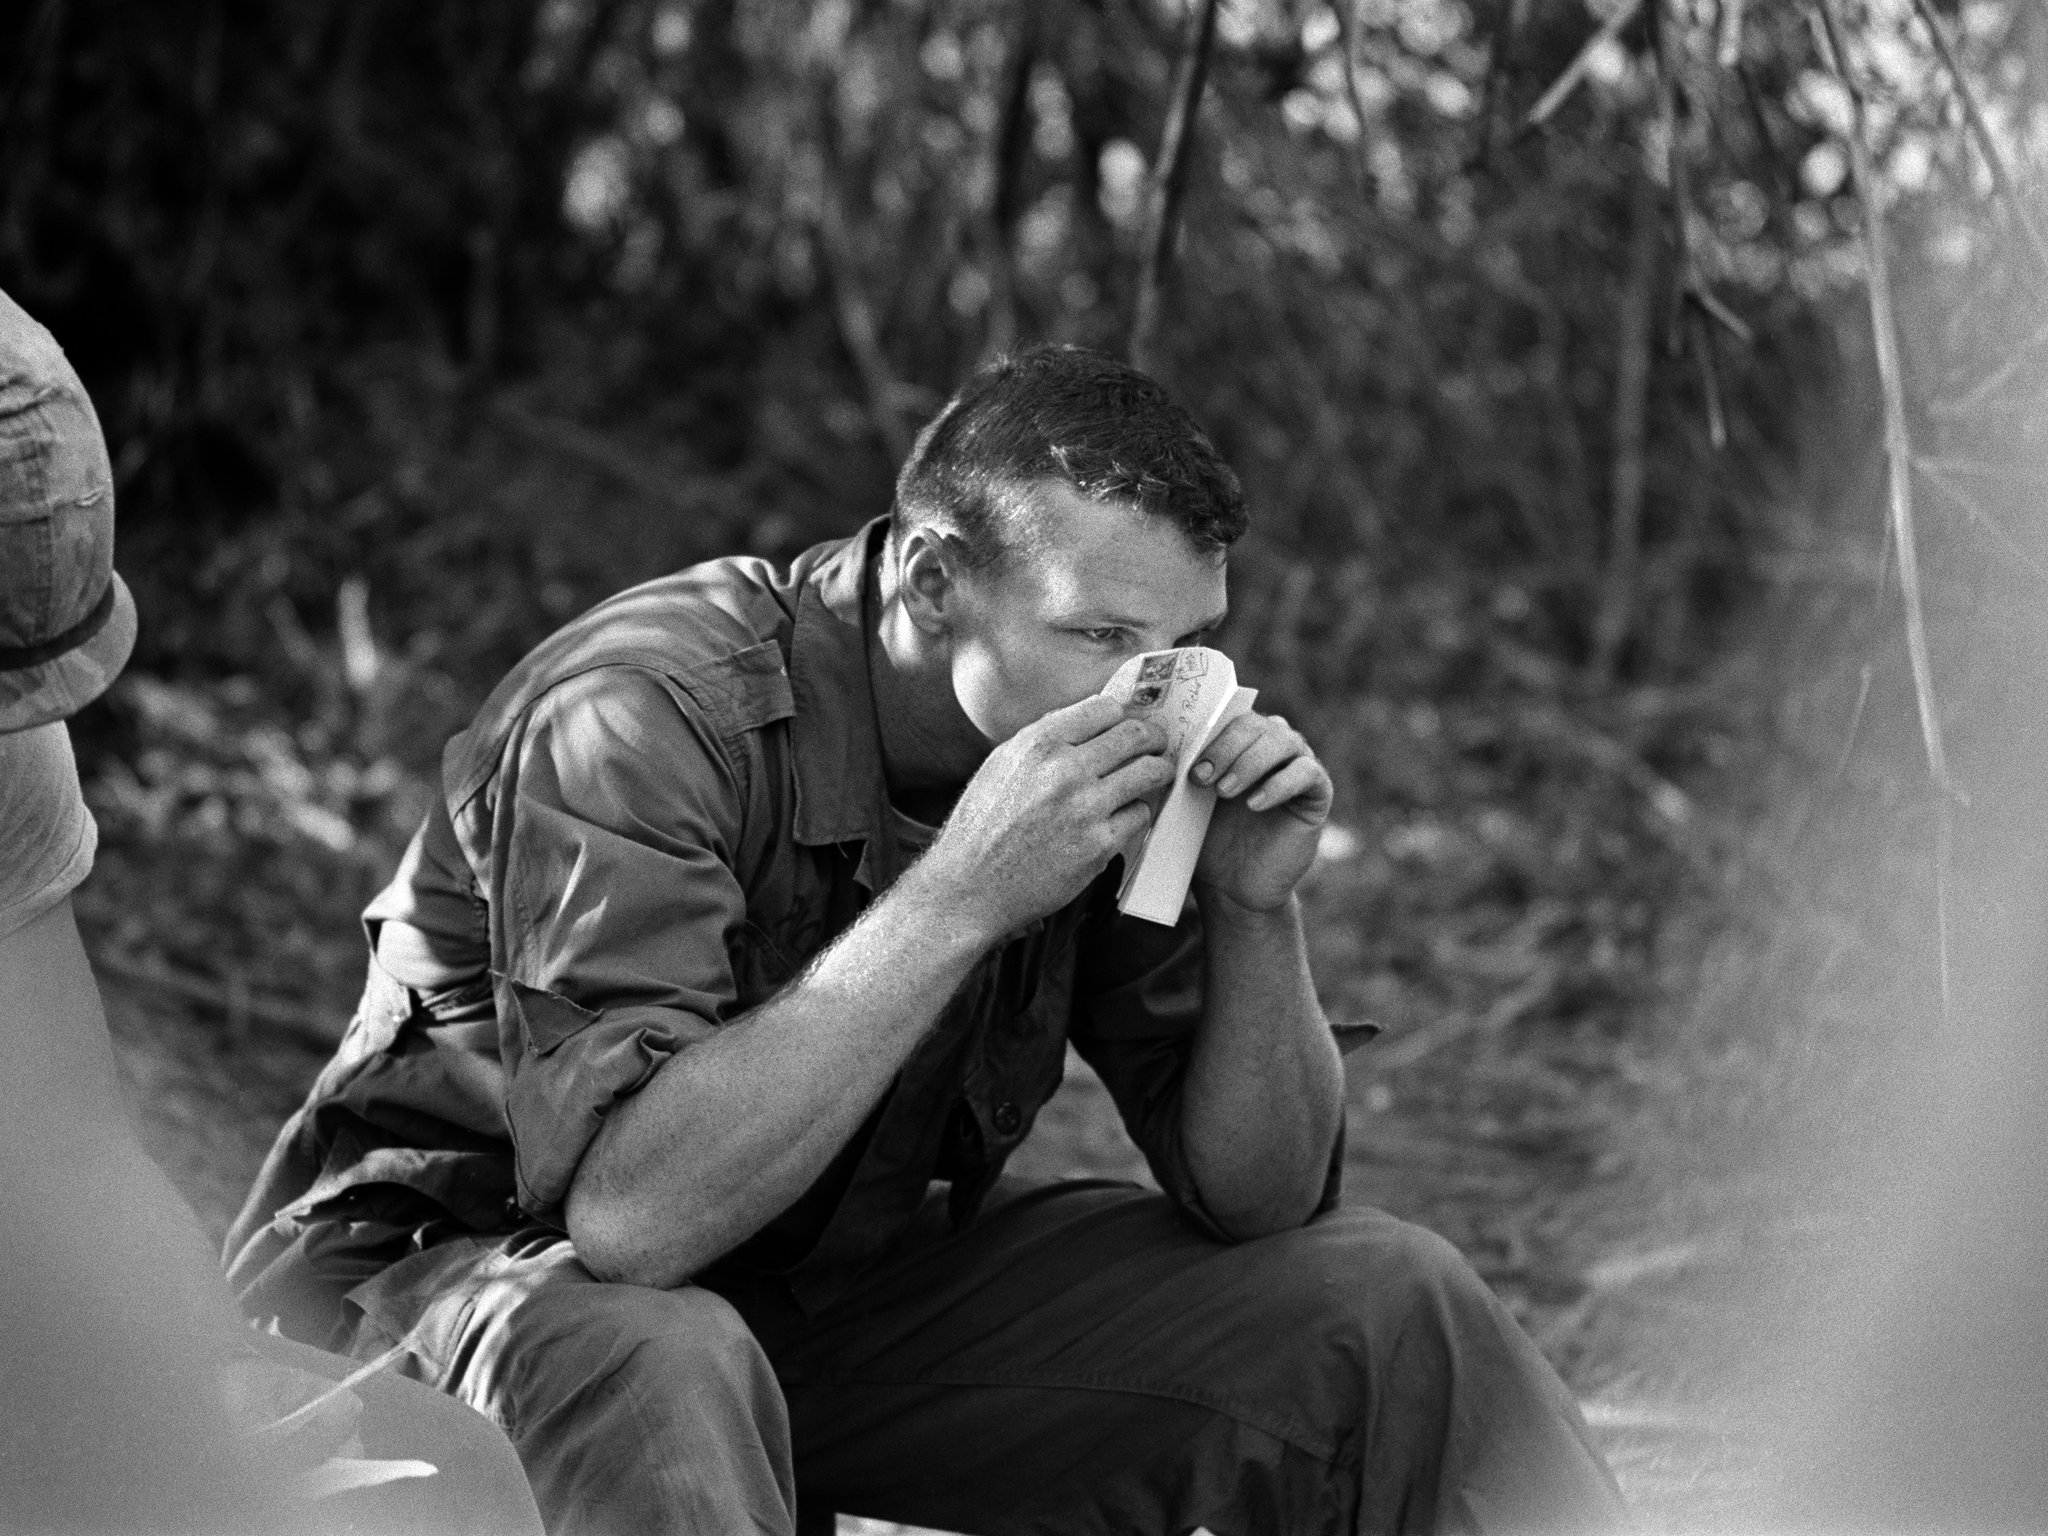 PFC Richie sniffs at the delicate perfume of his girlfriend in Jay, Oklahoma, as he opens her letter in Vietnam, April 12, 1966